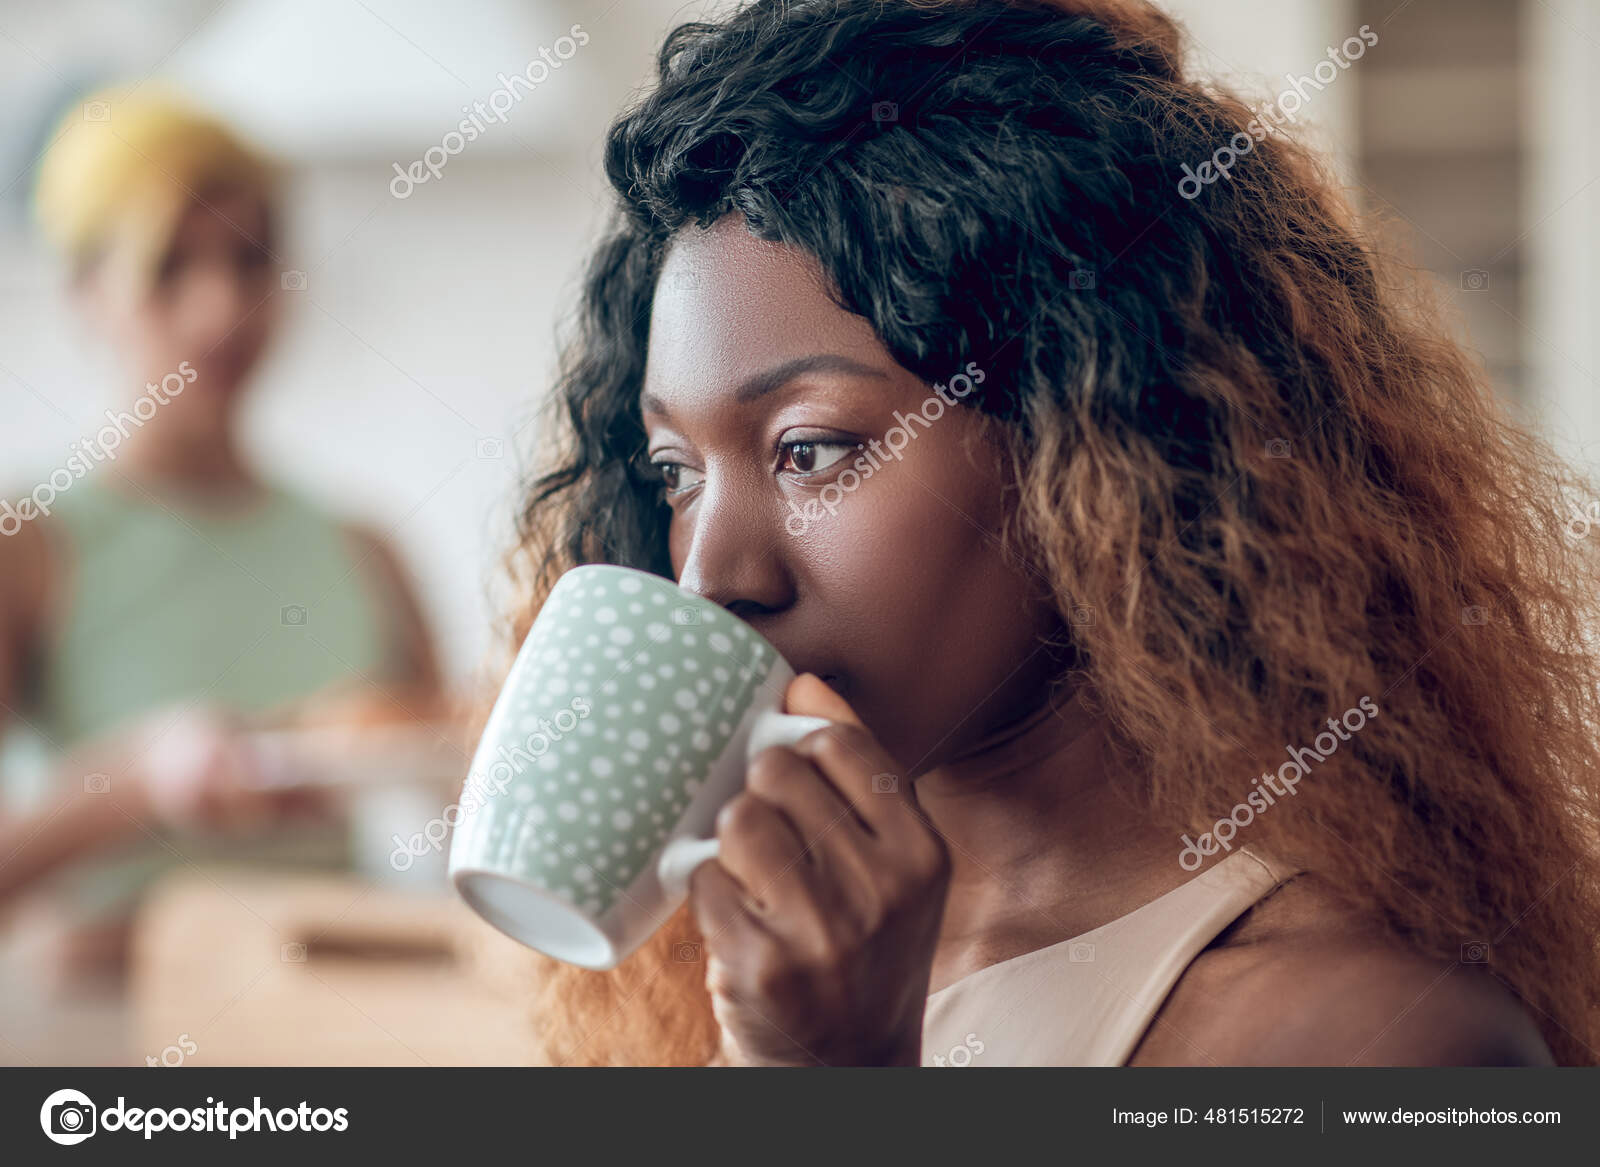 Close-up of a woman holding a cup of black coffee